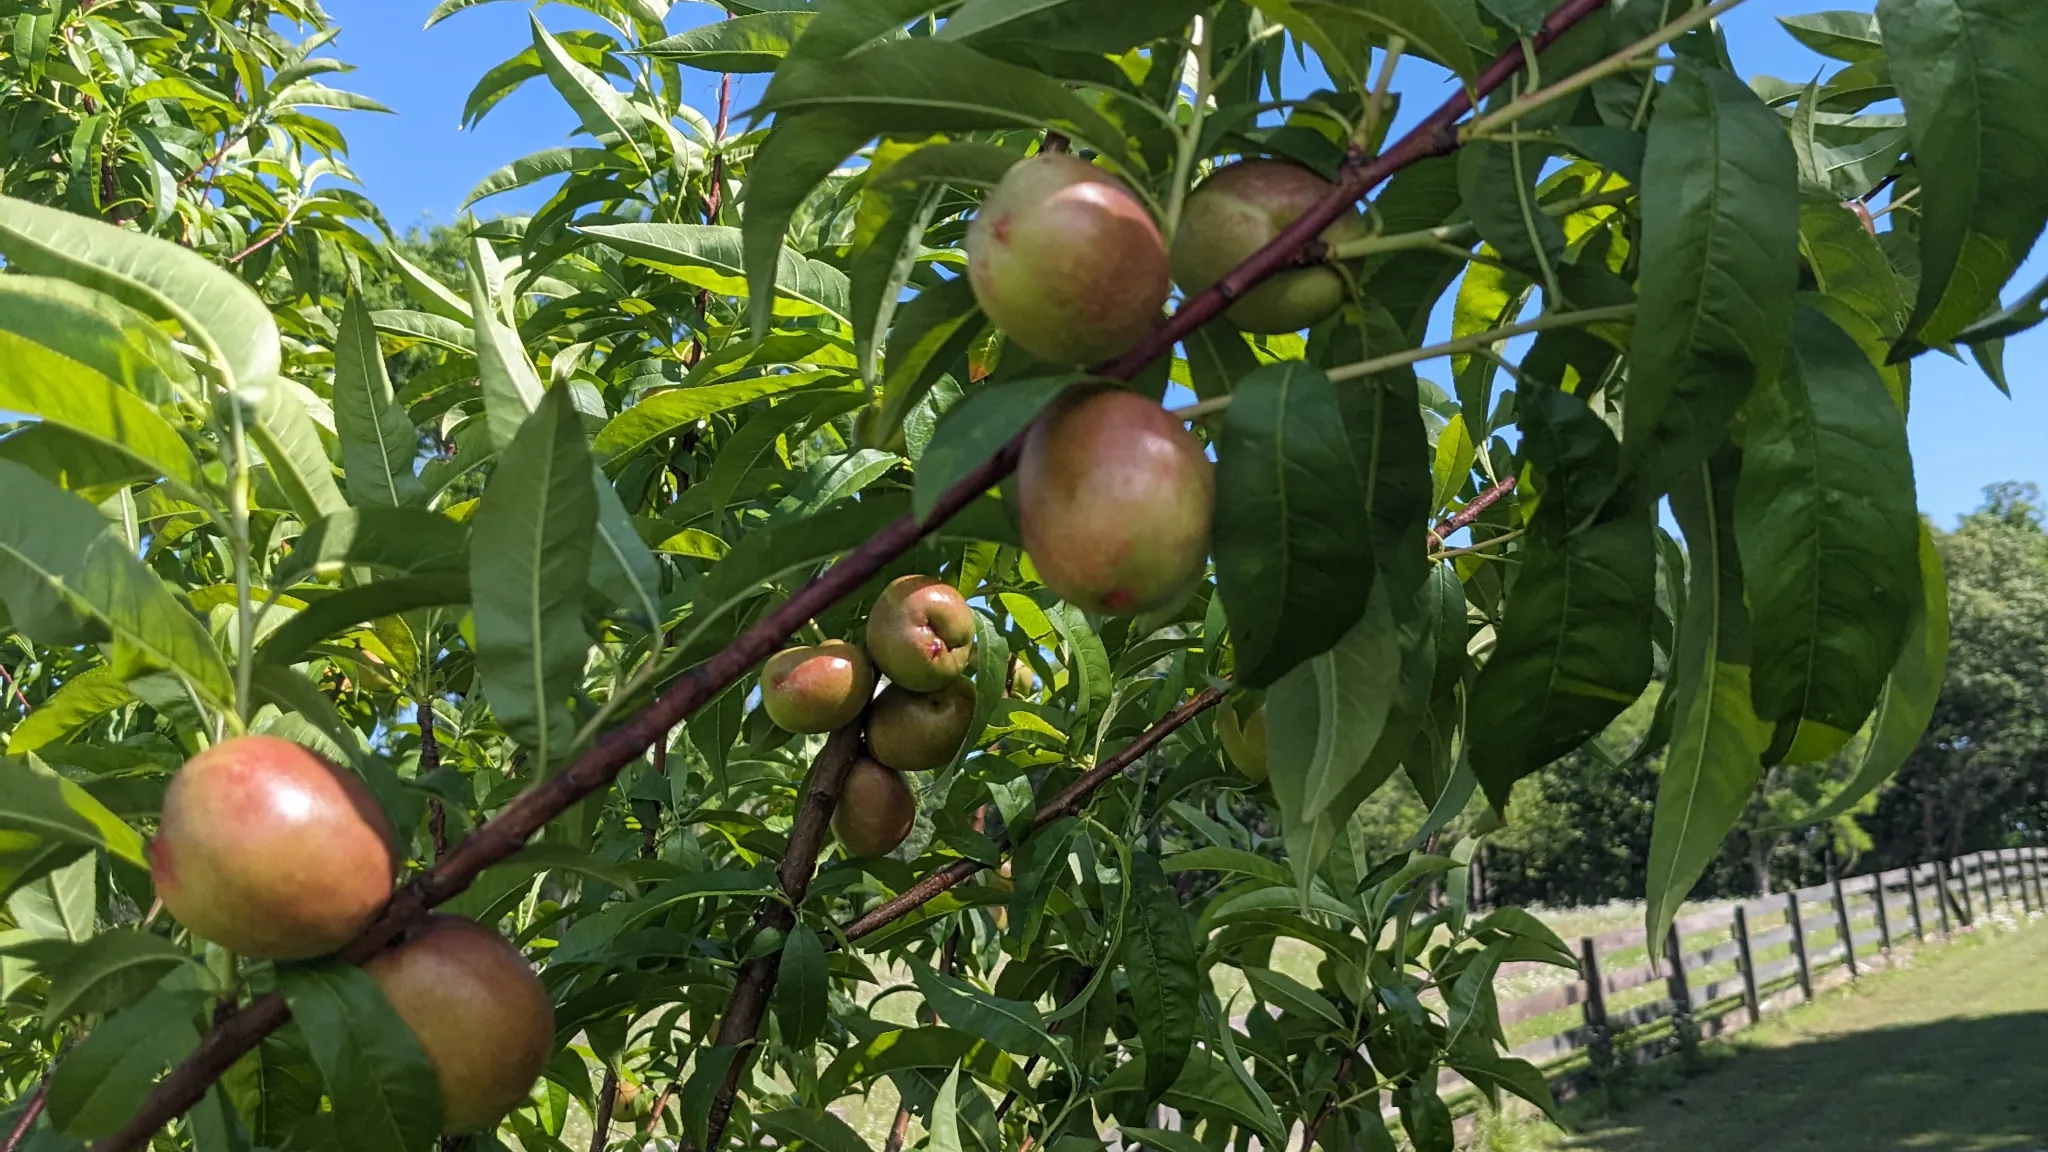 Peach tree with unripe peaches growing.